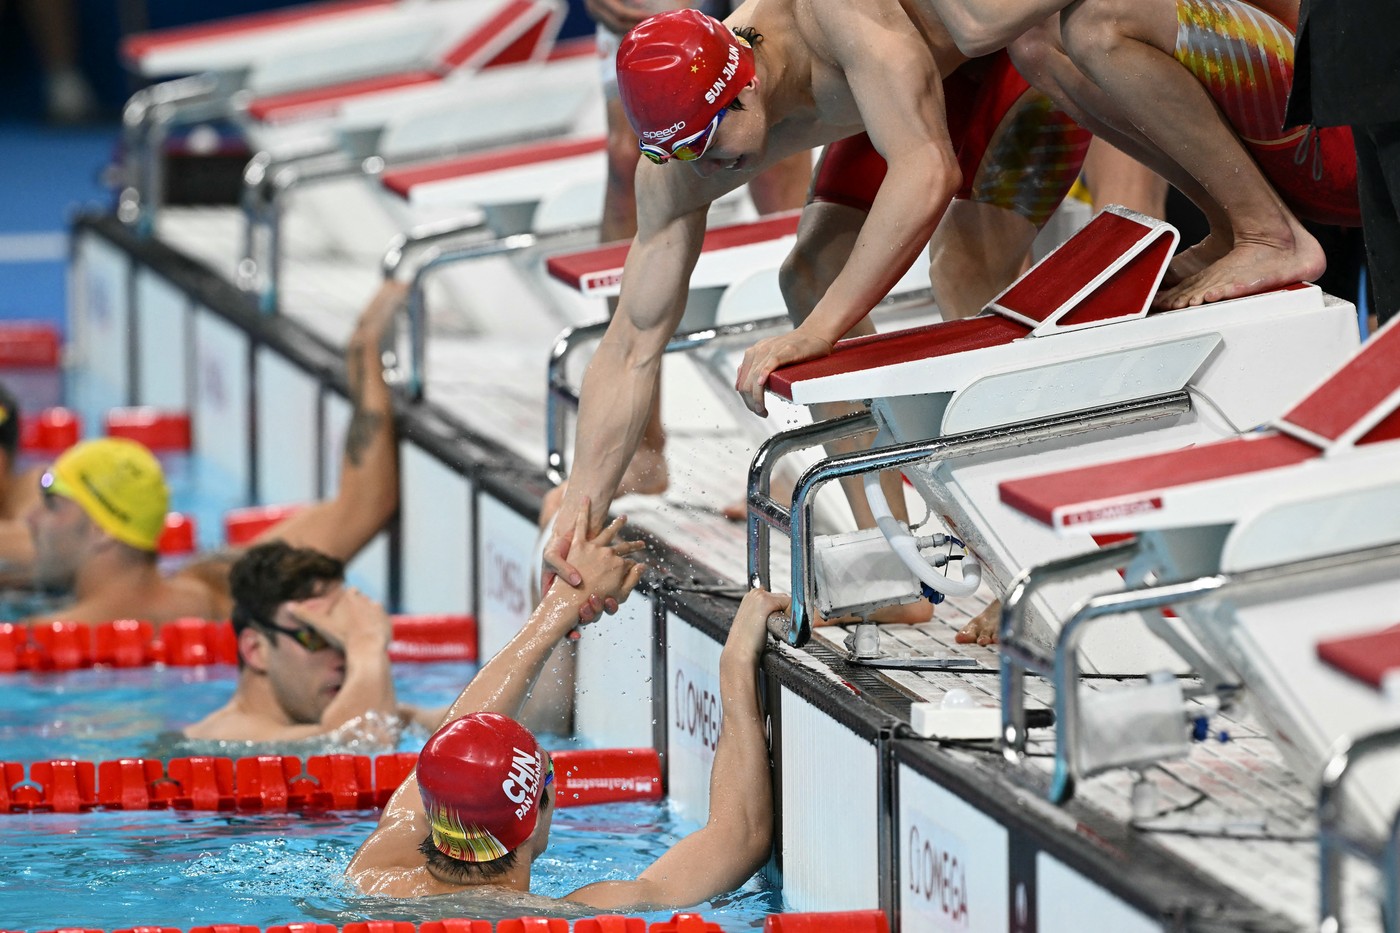 China's Pan Zhanle (L) and China's Sun Jiajun (R) celebrate winning the final of the men's 4x100m medley relay final swimming event during the Paris 2024 Olympic Games at the Paris La Defense Arena in Nanterre, west of Paris, on August 4, 2024.,Image: 895952697, License: Rights-managed, Restrictions: , Model Release: no